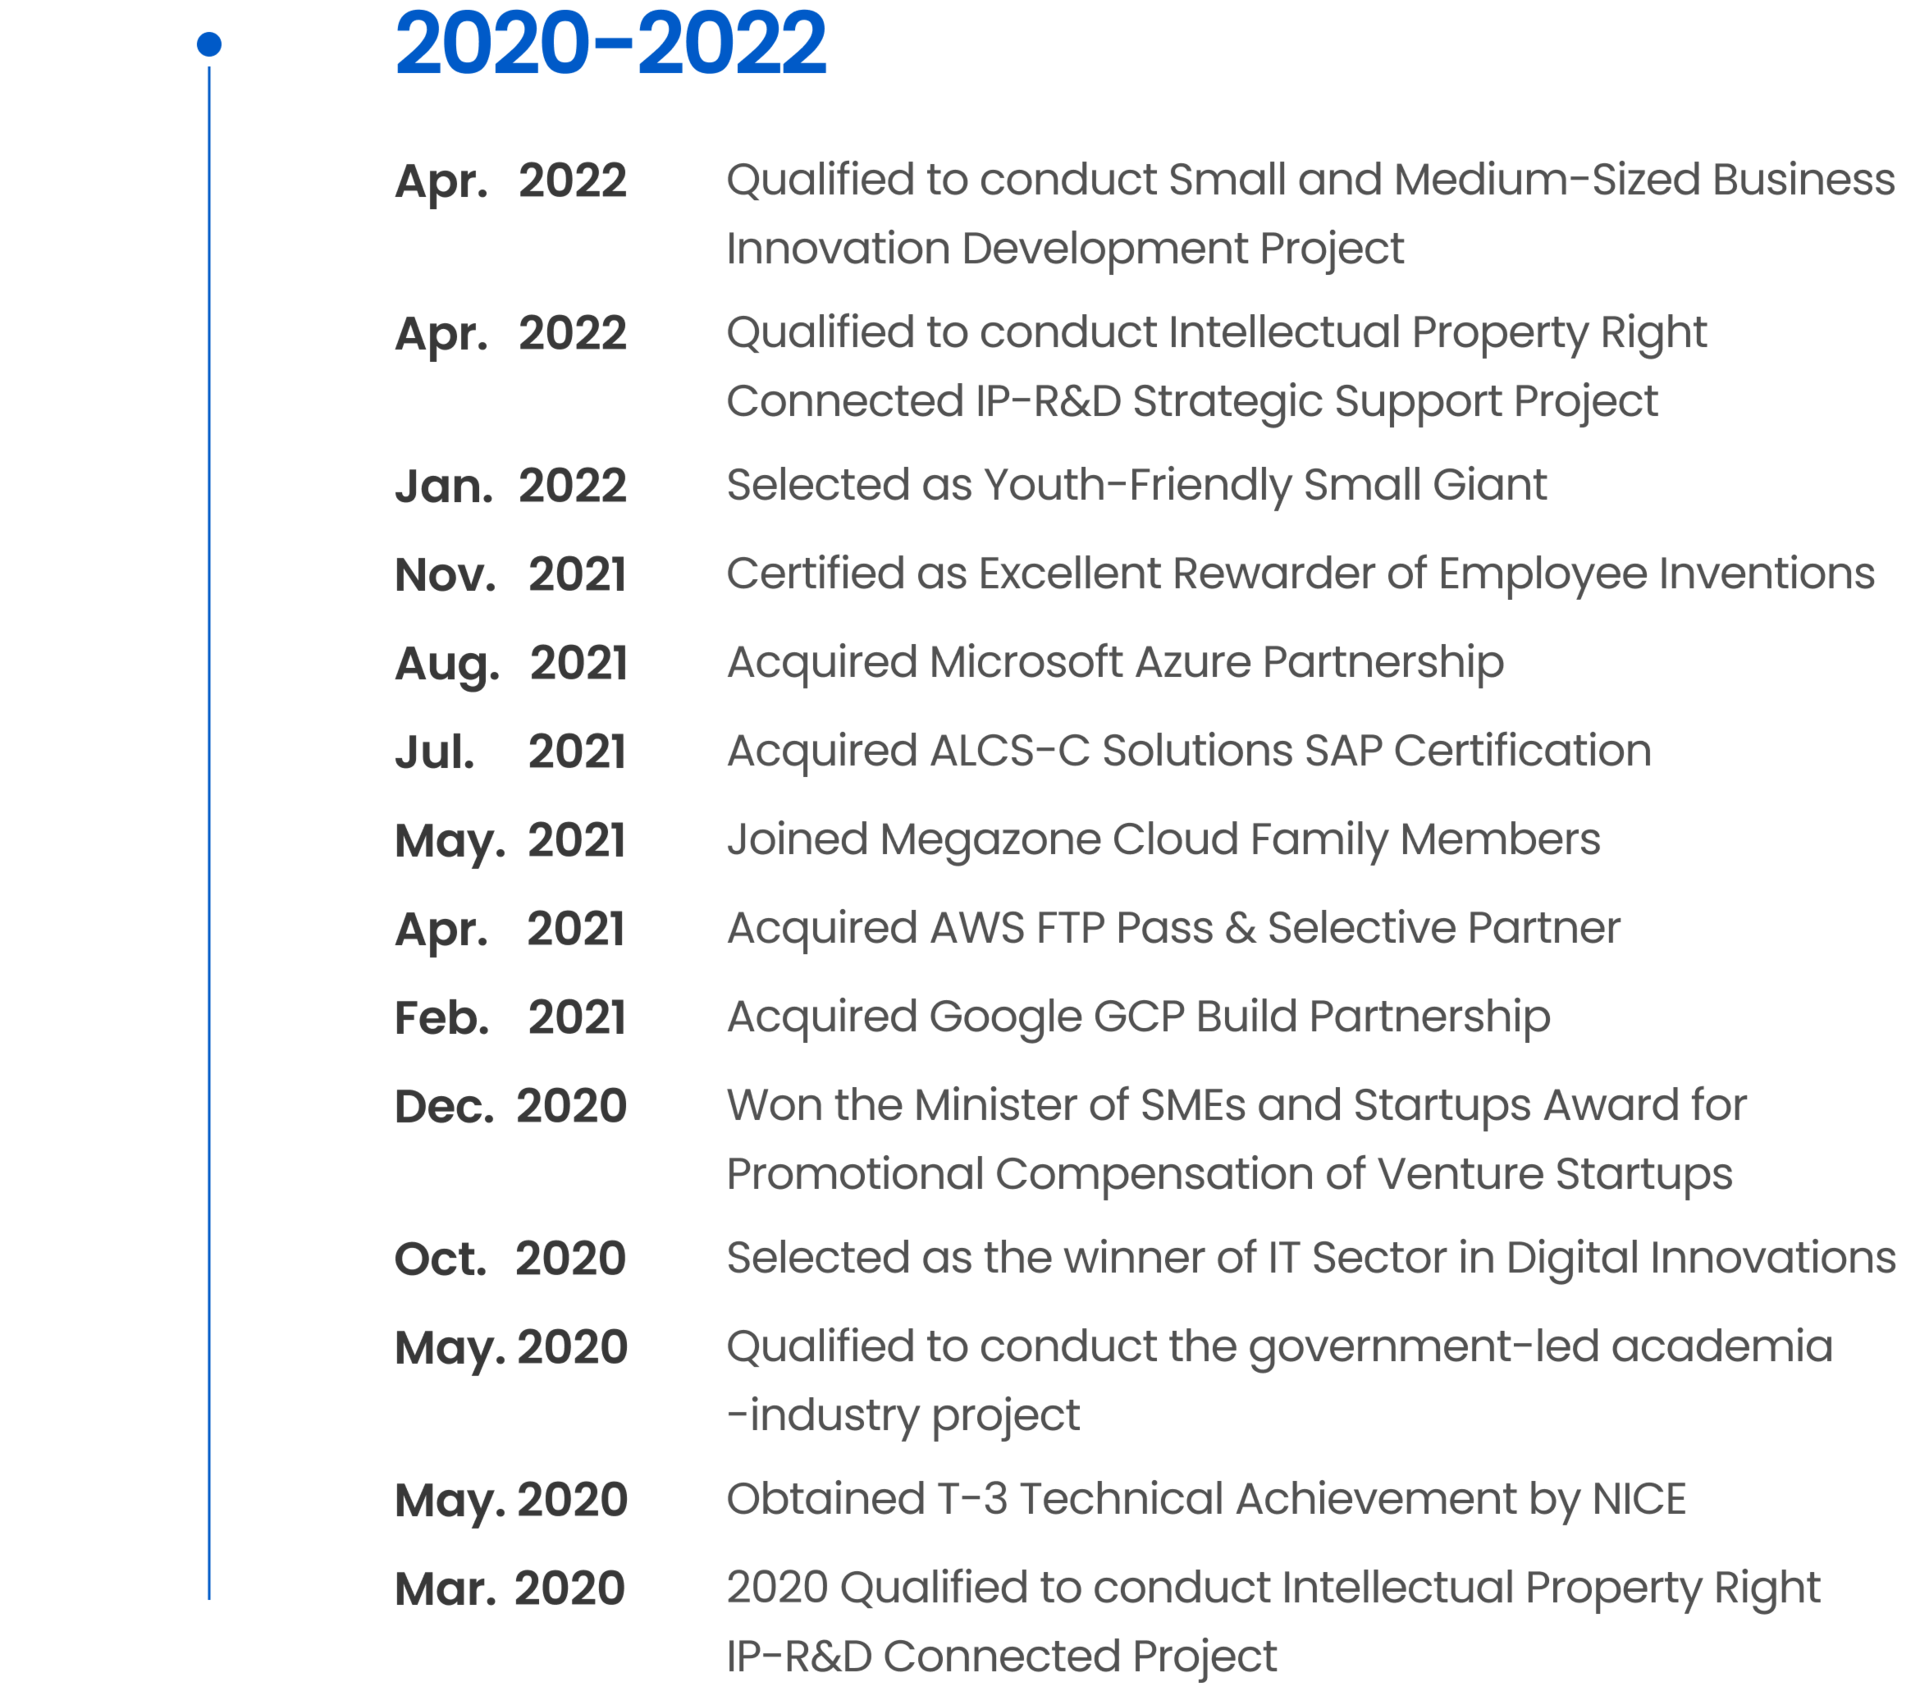 Apr. 2022 Qualified to conduct Small and Medium-Sized Business Innovation Development Project Apr. 2022 Qualified to conduct Intellectual Property Right Connected IP-R&D Strategic Support Project Jan. 2022 Selected as Youth-Friendly Small Giant Nov. 2021 Certified as Excellent Rewarder of Employee Inventions Aug. 2021 Acquired Microsoft Azure Partnership  Jul. 2021 Acquired ALCS-C Solutions SAP Certification May. 2021 Joined Megazone Cloud Family Members Apr. 2021 Acquired AWS FTP Pass & Selective Partner Feb. 2021 Acquired Google GCP Build Partnership Dec. 2020 Won the Minister of SMEs and Startups Award for Promotional Compensation of Venture Startups Oct. 2020 Selected as the winner of IT Sector in Digital Innovations  May. 2020 Qualified to conduct the government-led academia-industry project May. 2020 Obtained T-3 Technical Achievement by NICE Mar. 2020 Qualified to conduct Intellectual Property Right IP-R&D Connected Project